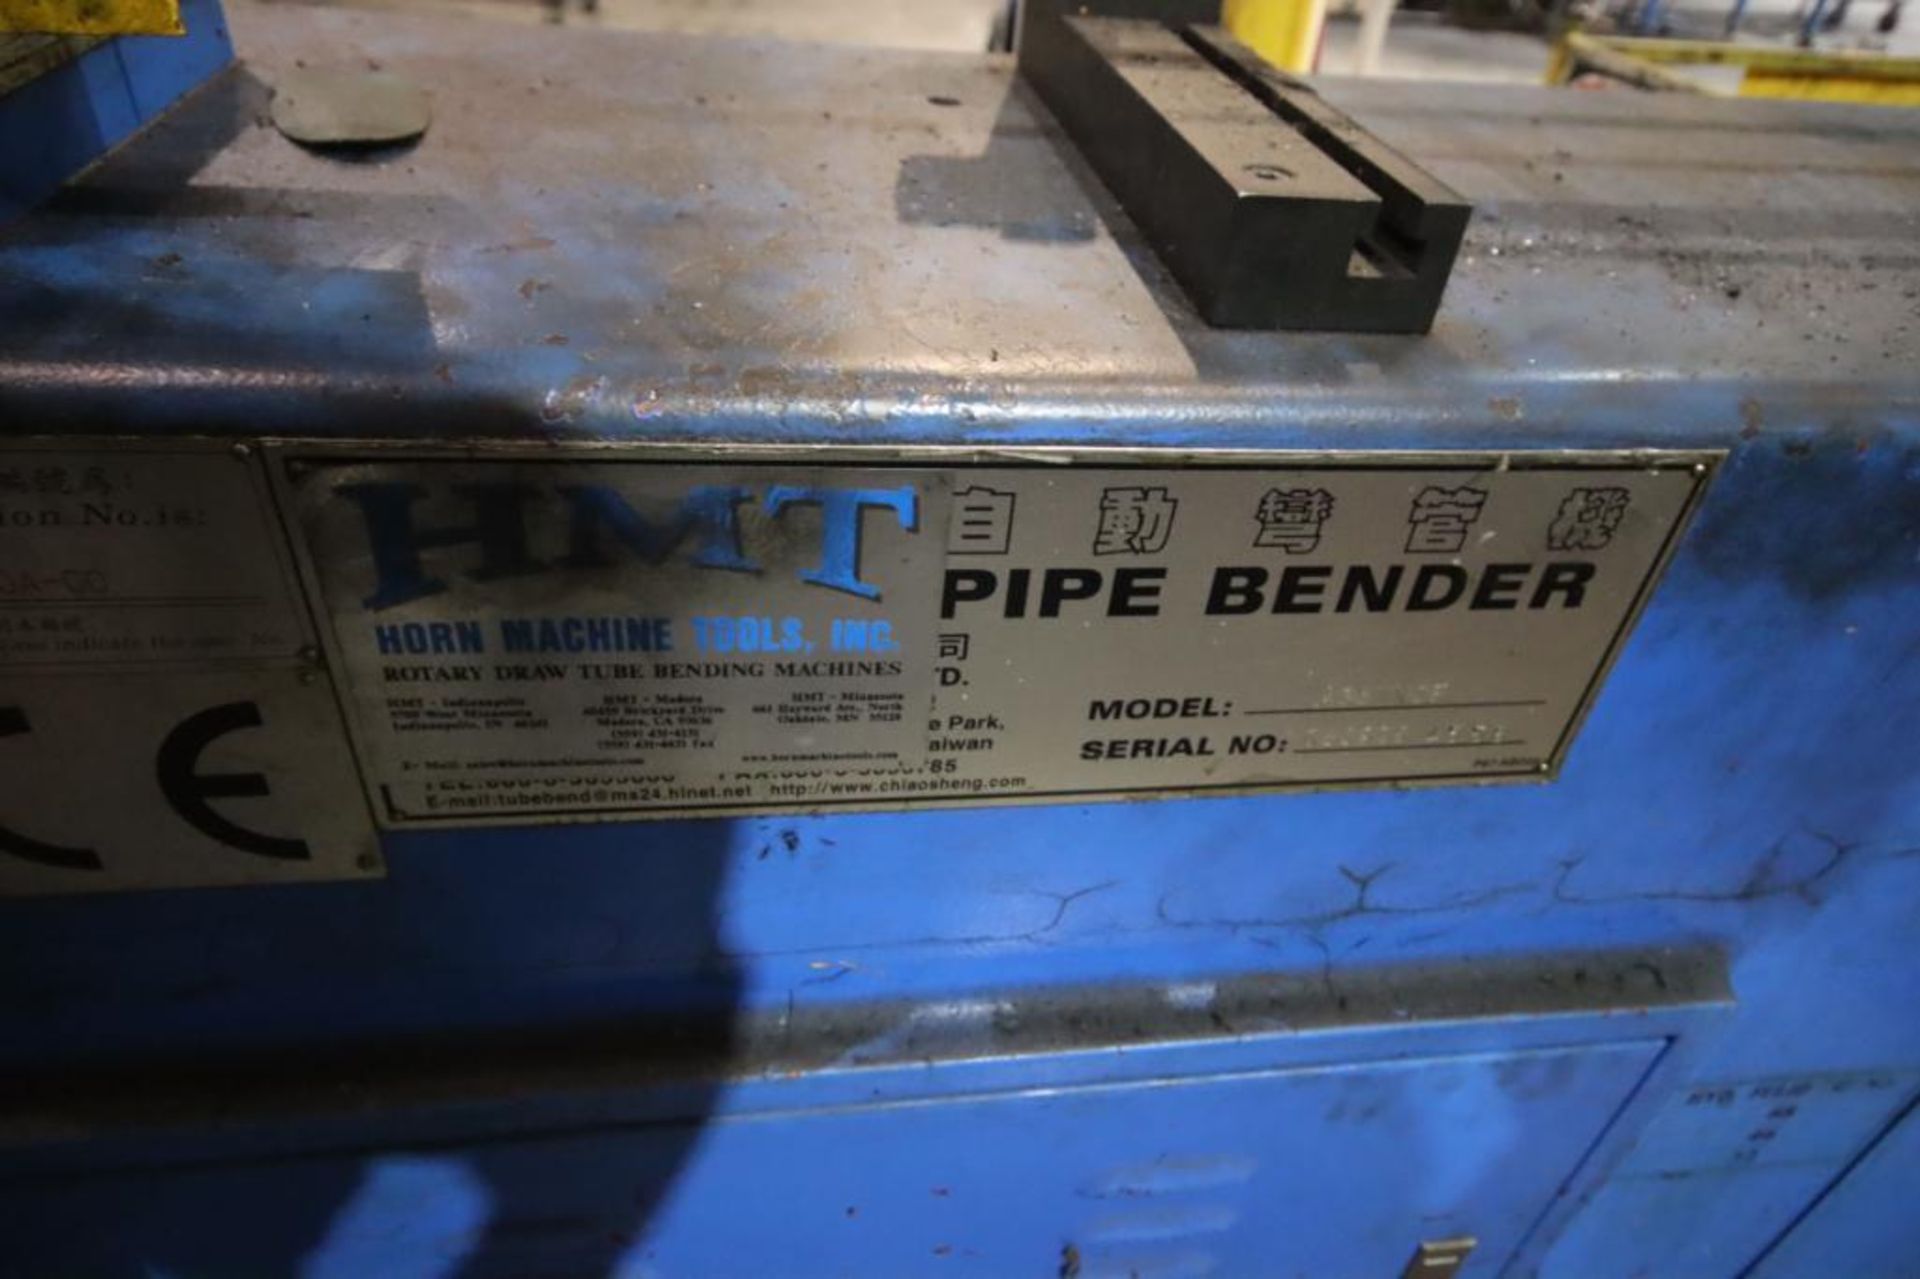 HMT NC Tube Bender Model A38TNCB, Appx. 1" Square Die, Serial #080928 455B, Touch Panel Control - Image 3 of 8